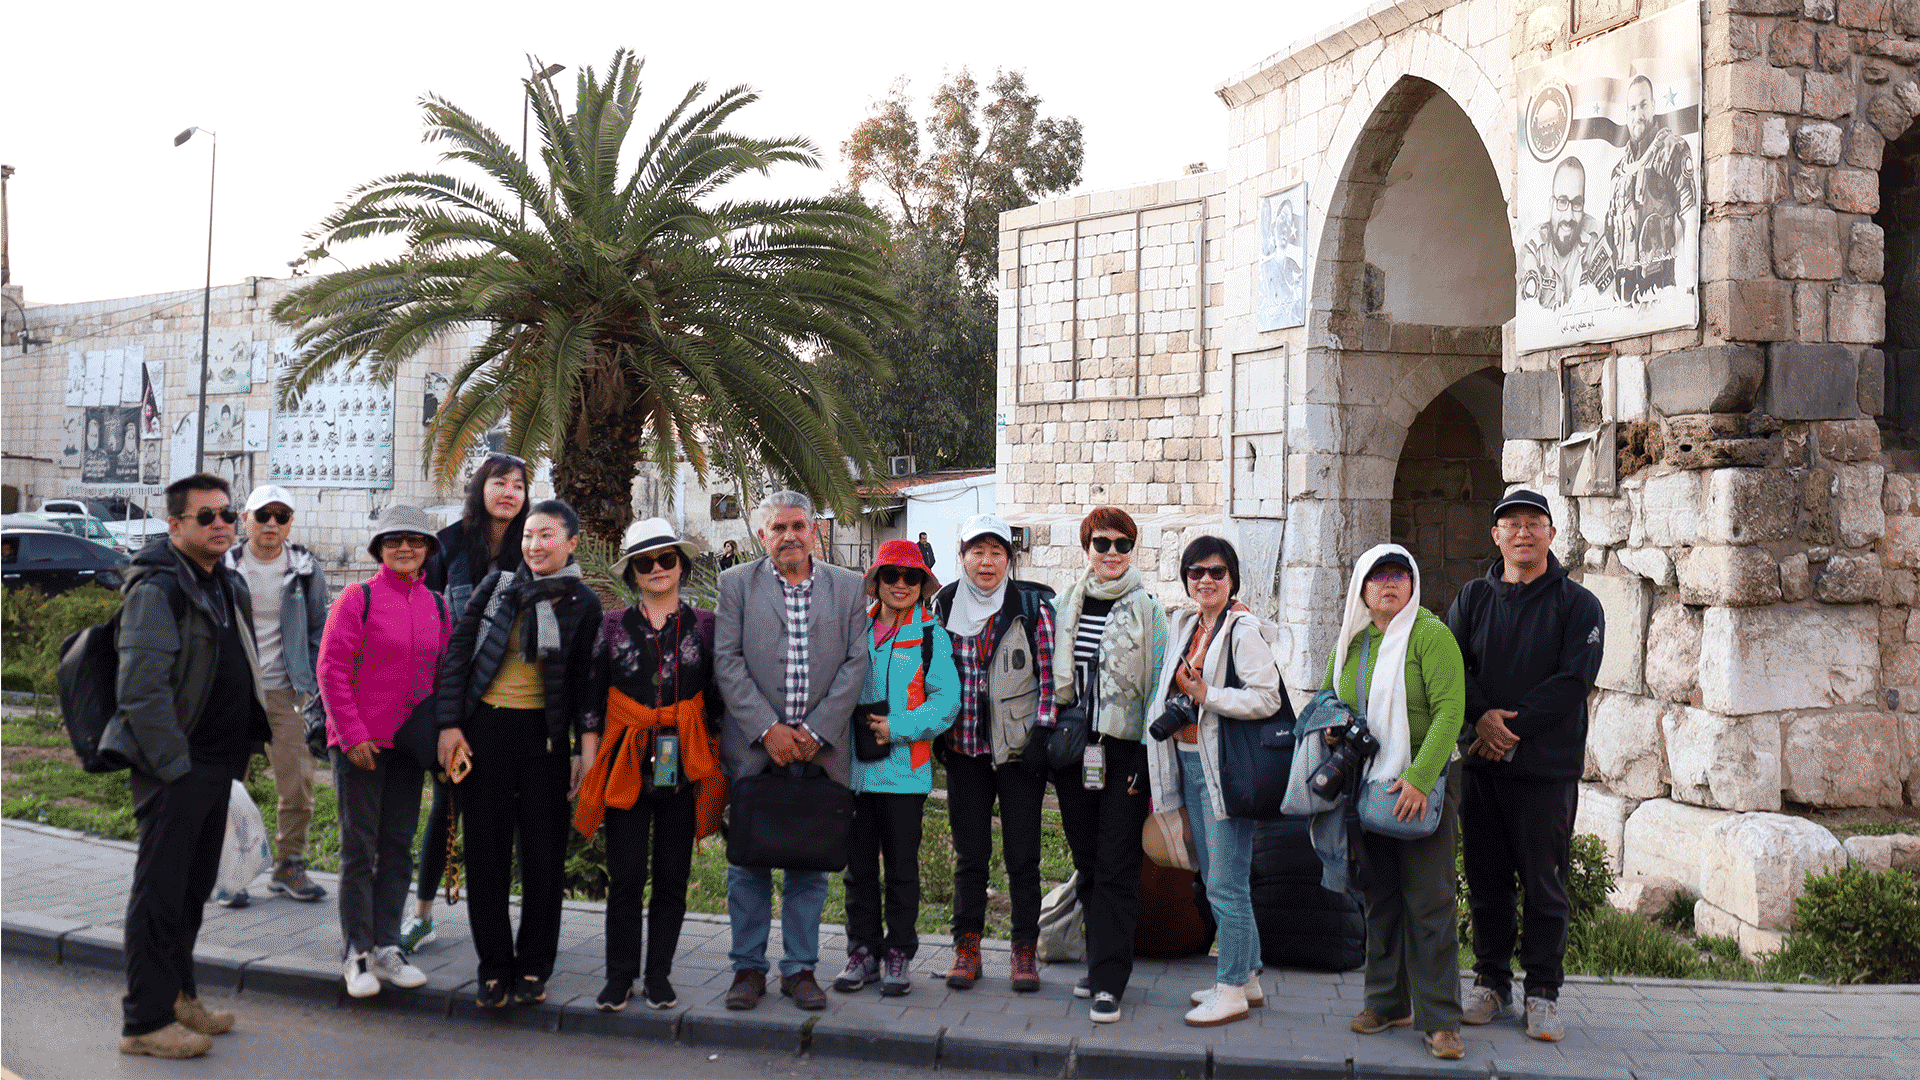 Nawafir Travel welcomes Chinese tourists in the Old Town of Damascus, with the Bab Touma Square serving as a captivating backdrop.